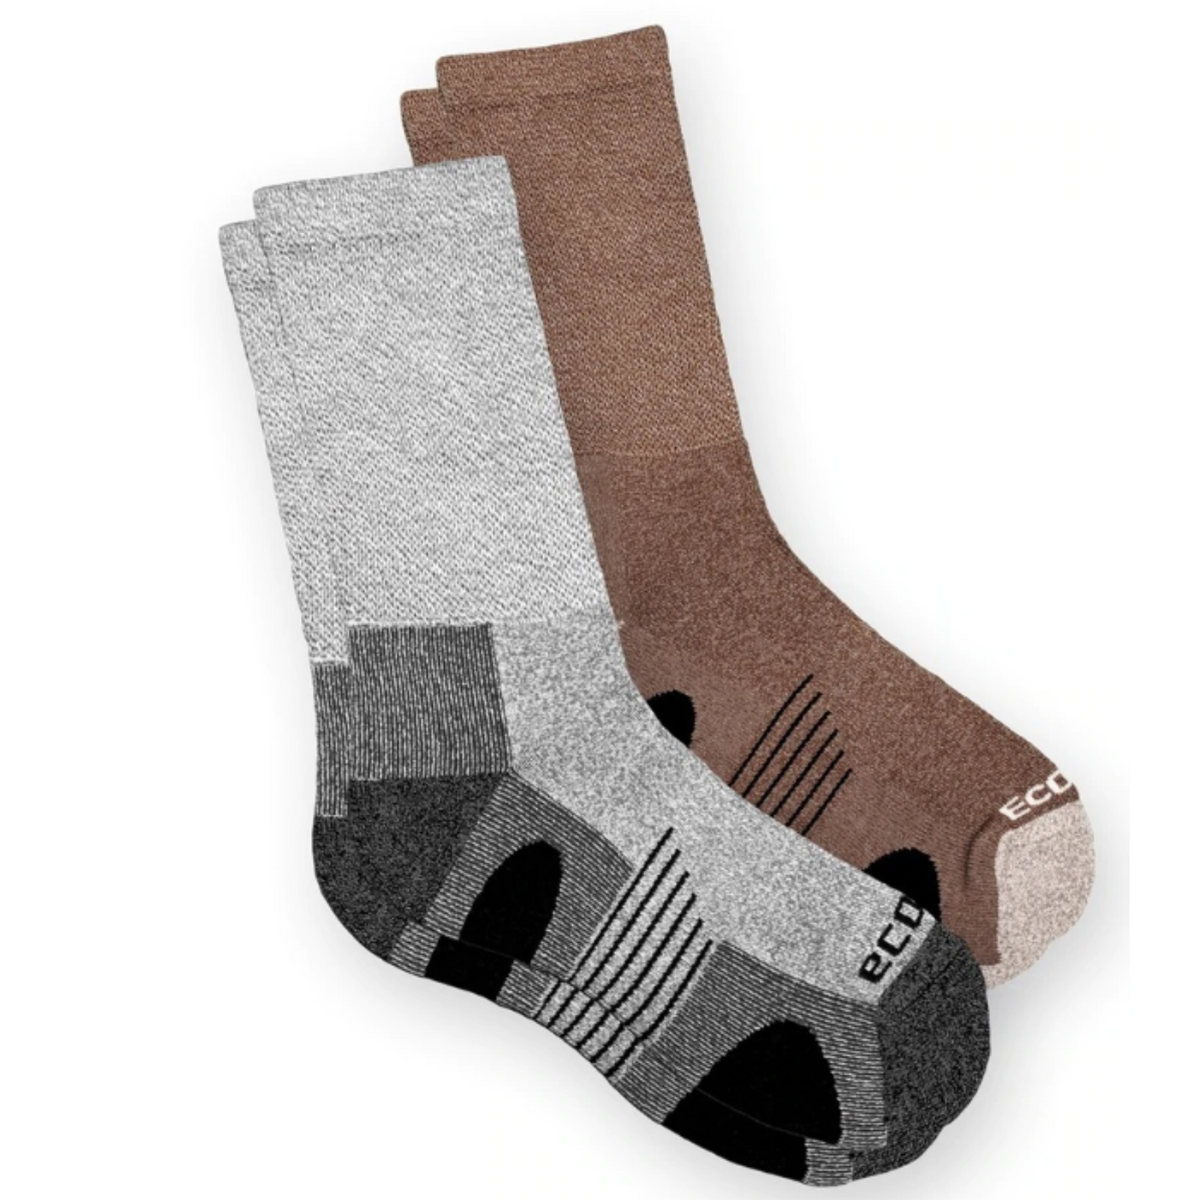 EcoSox Diabetic Non-Binding Bamboo Crew Hiking/Outdoor women&#39;s and men&#39;s socks in gray and brown